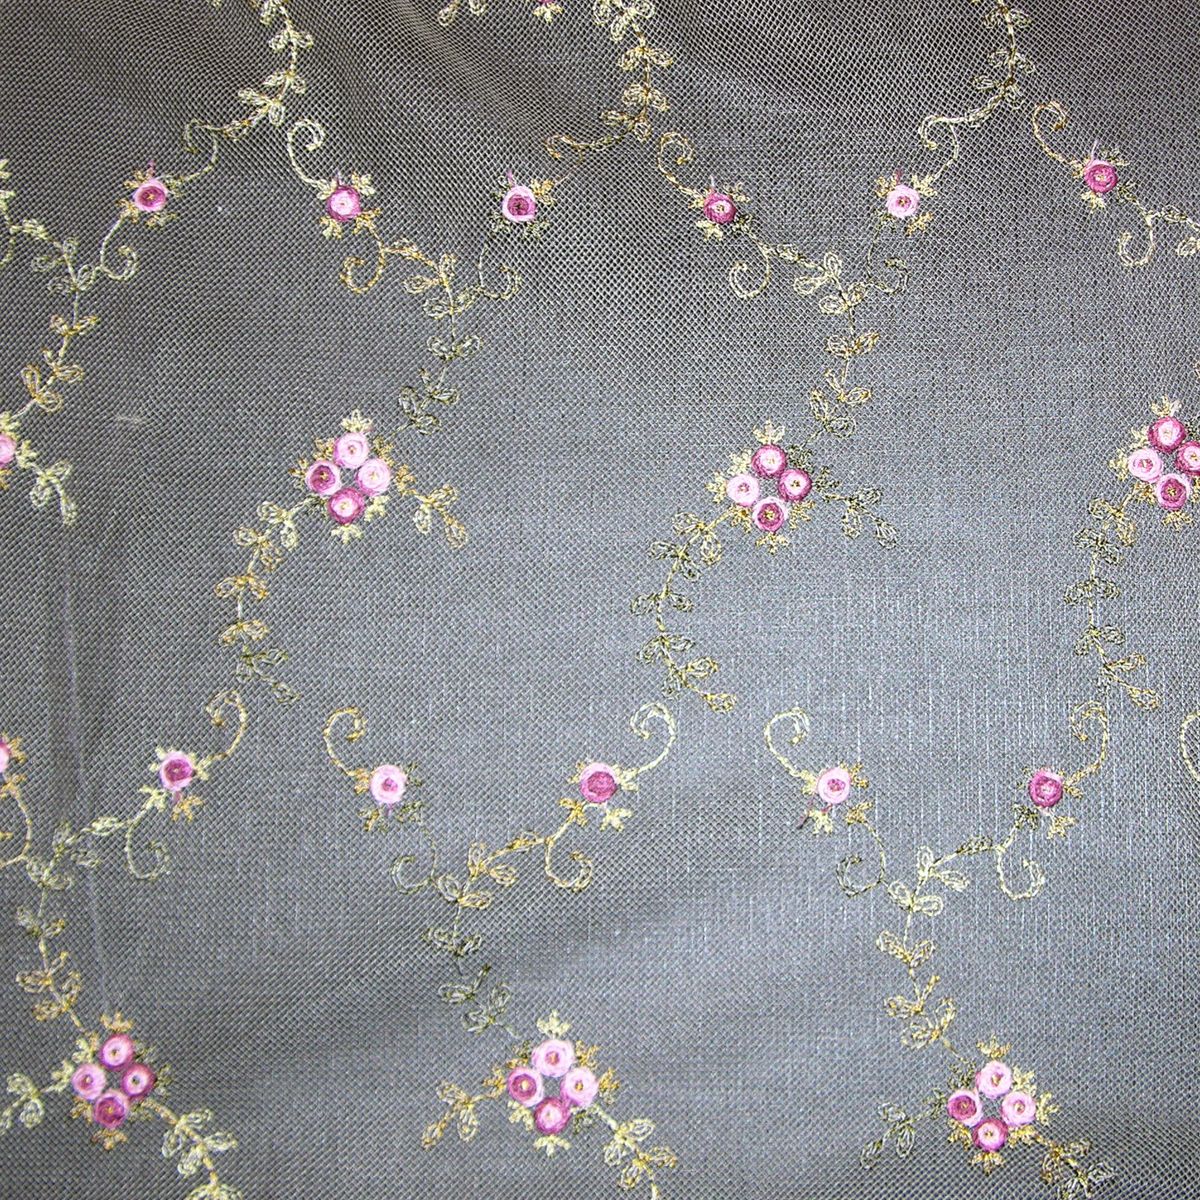 Florinette Sheer fabric in rose/green color - pattern number AU 44418075 - by Scalamandre in the Old World Weavers collection